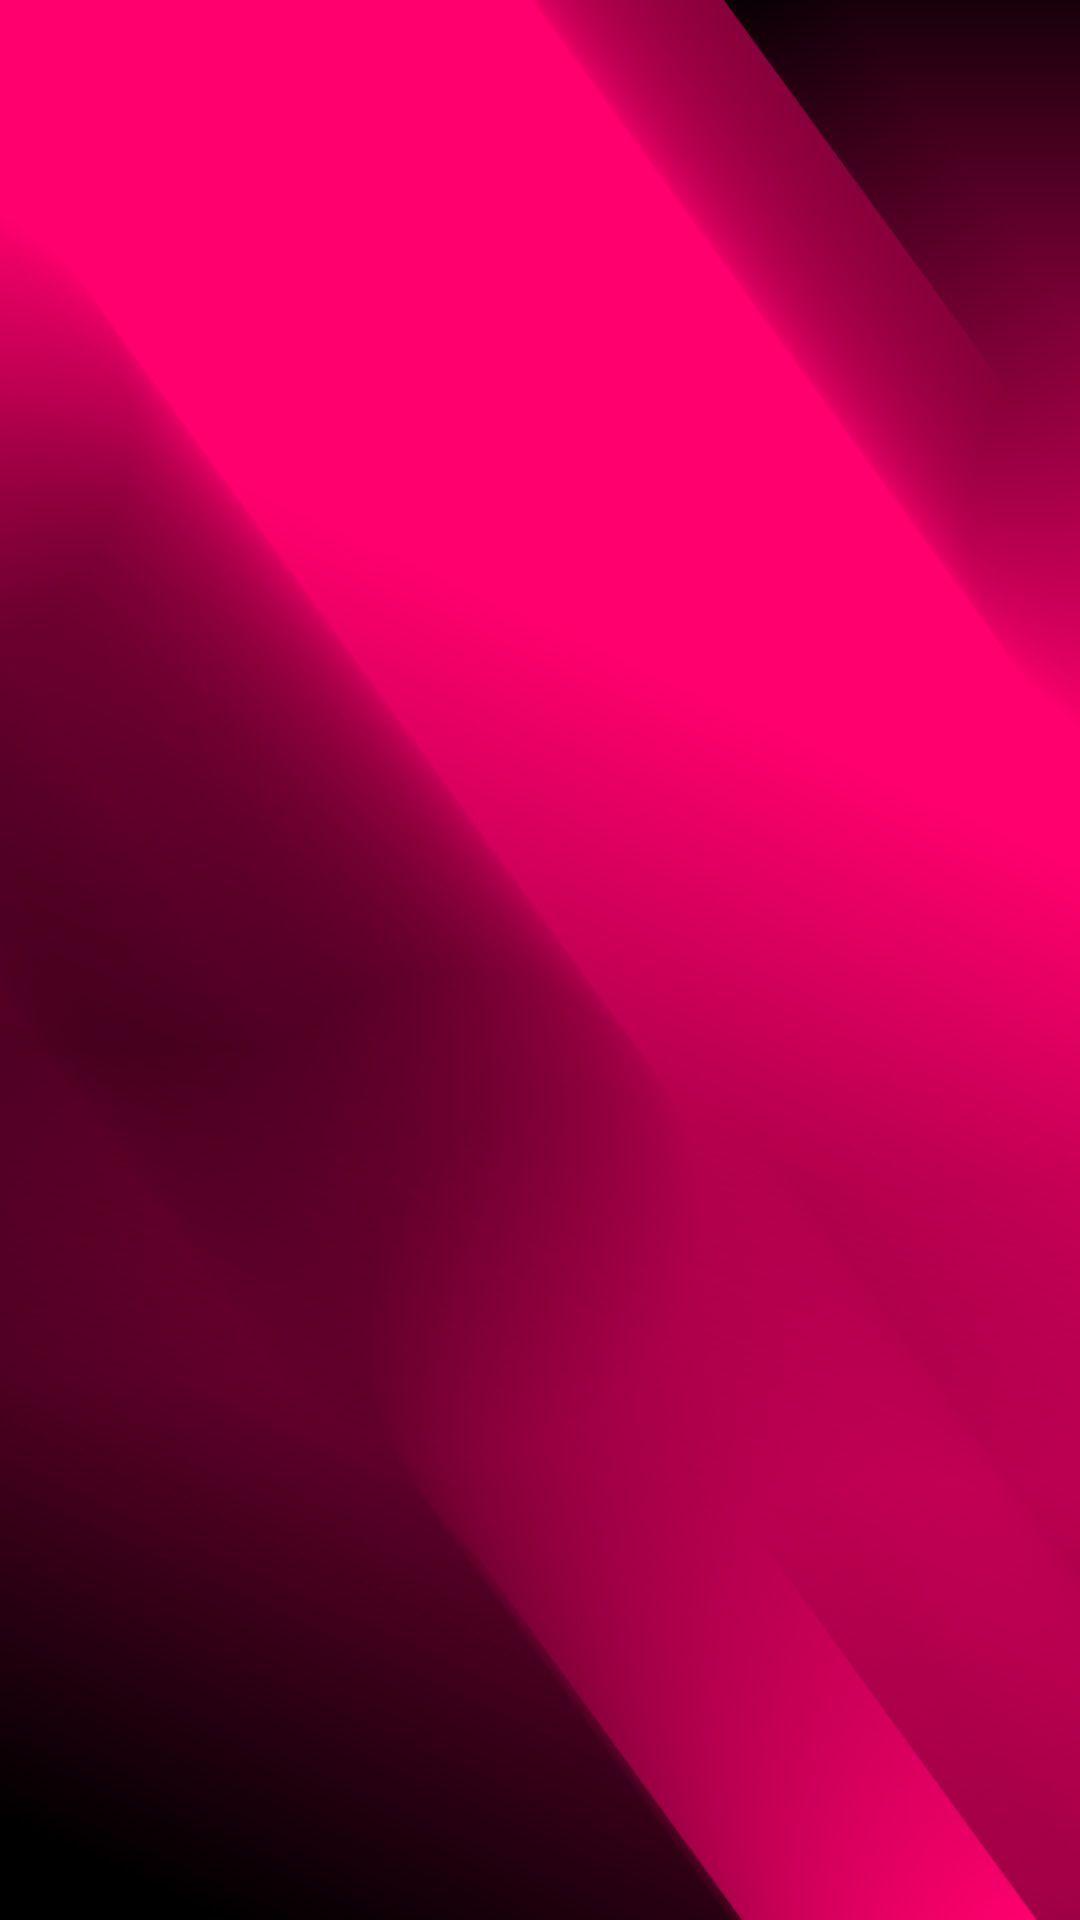 Wallpaper.wiki Cool Pink IPhone Background HD PIC WPD003604